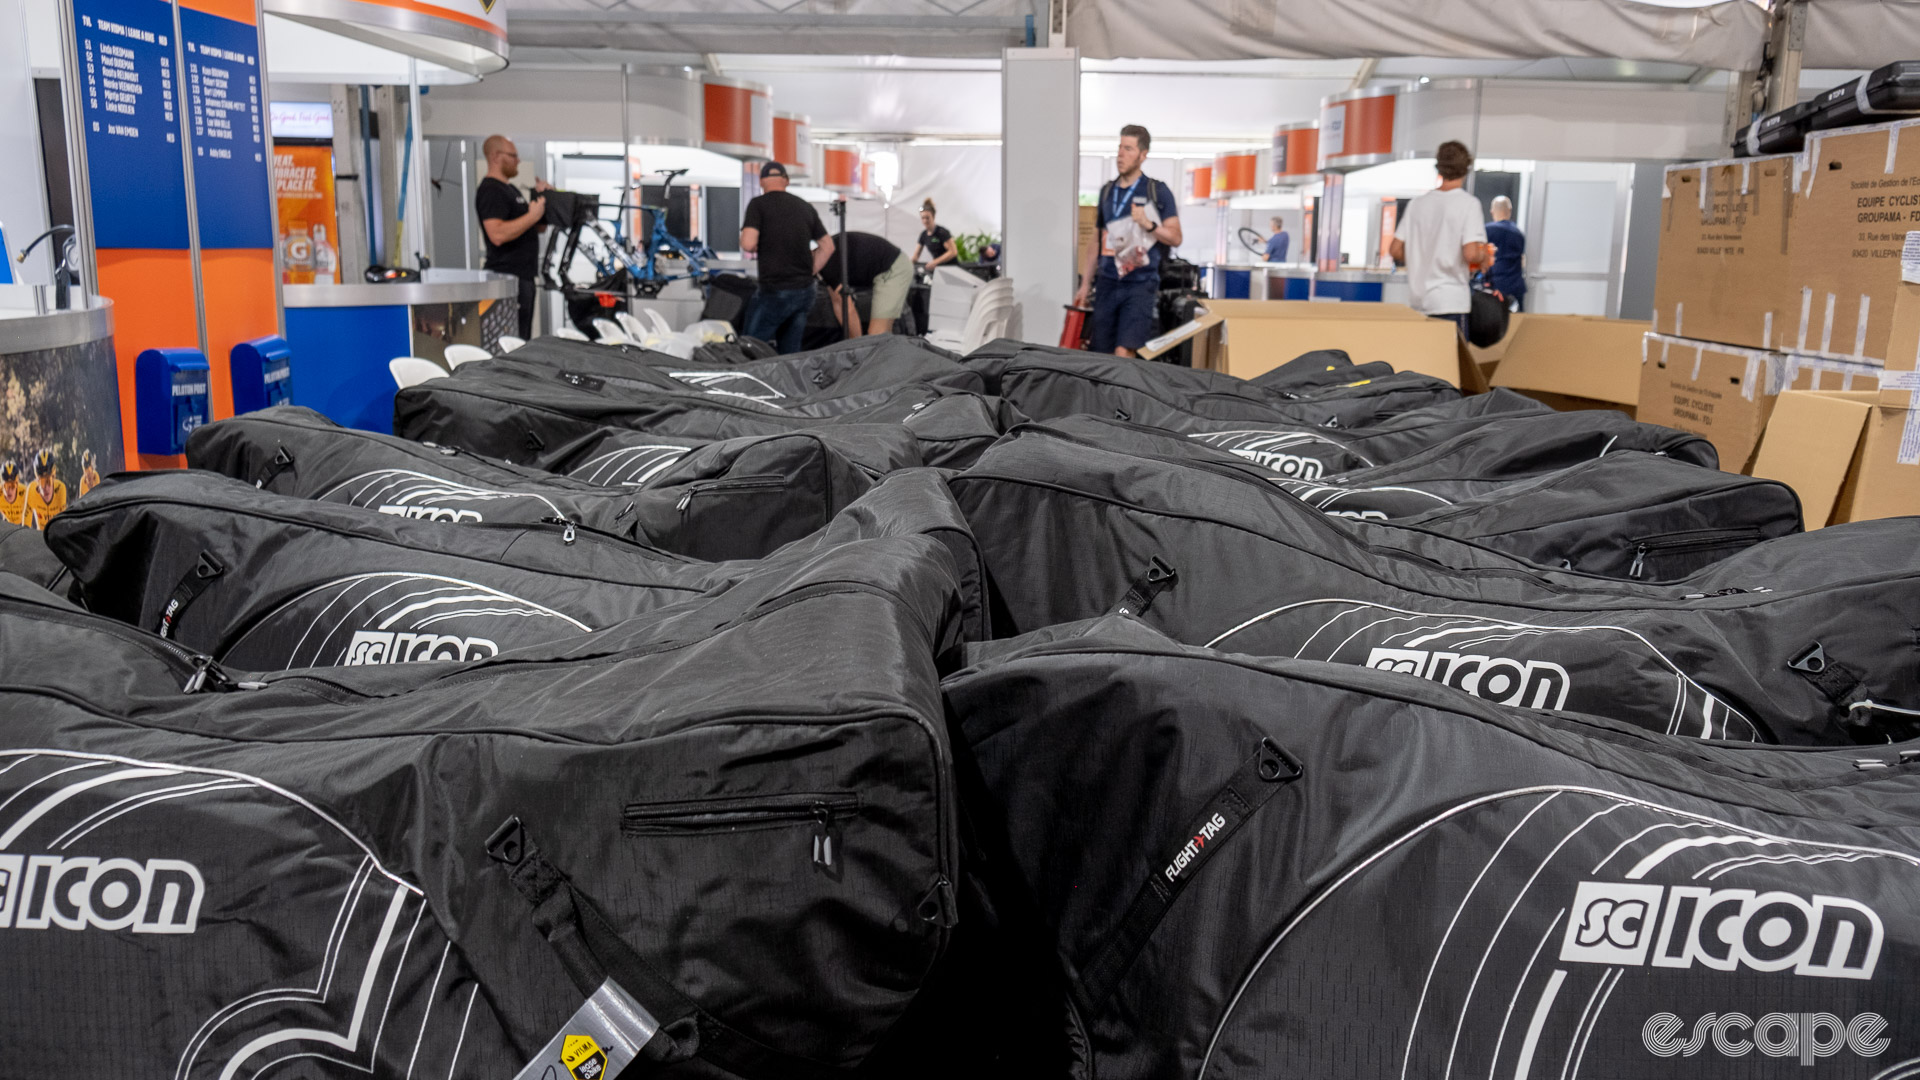 The photo shows bike bags ready to leave the Tour Down Under